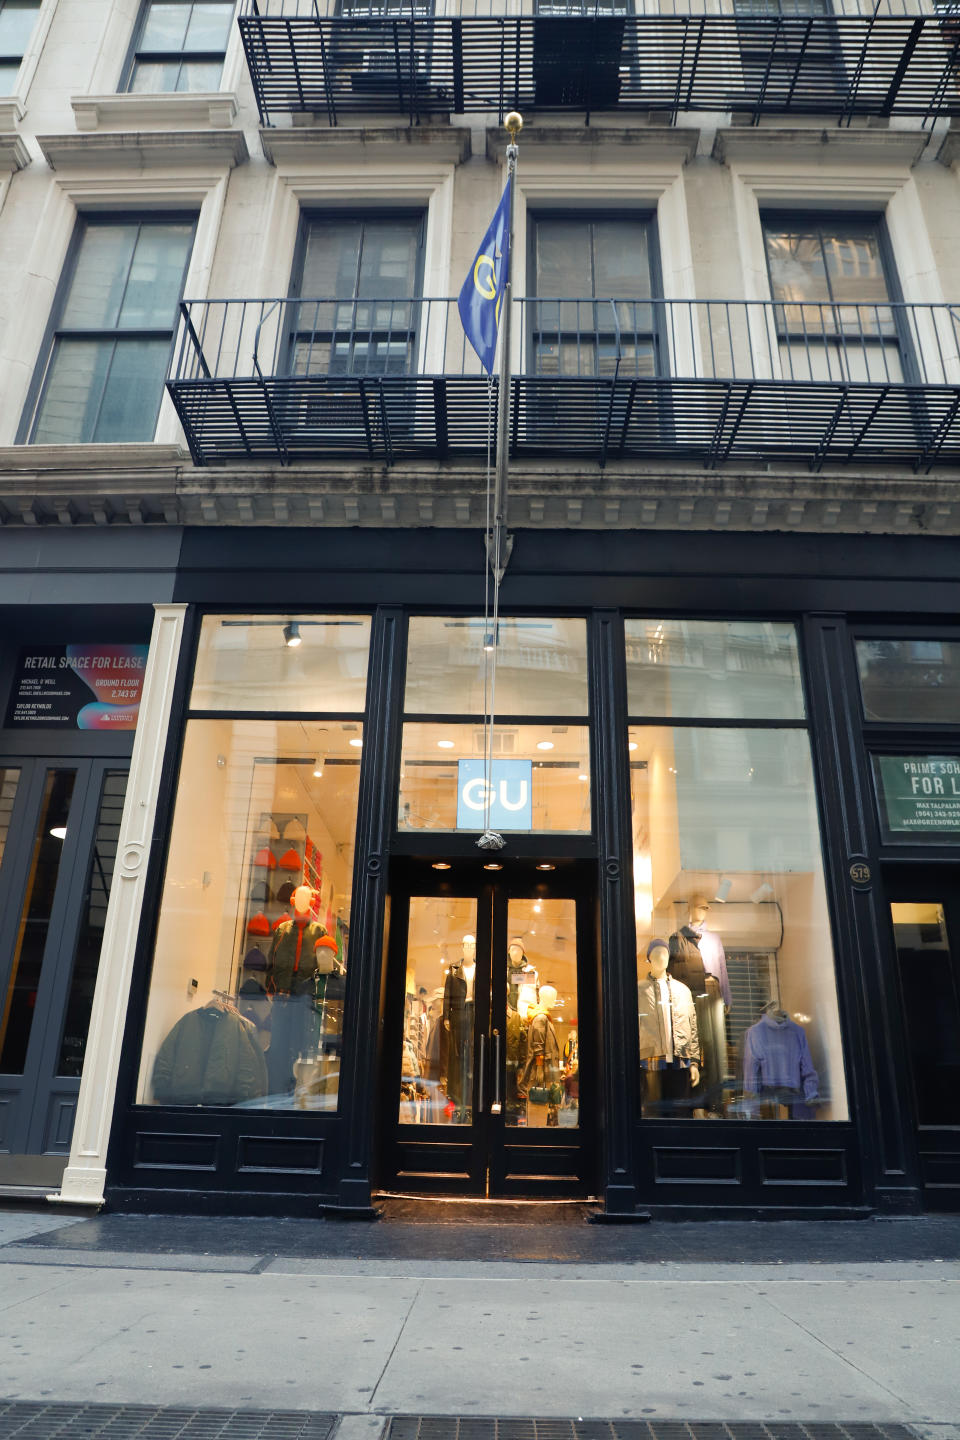 The store is located in the heart of SoHo.